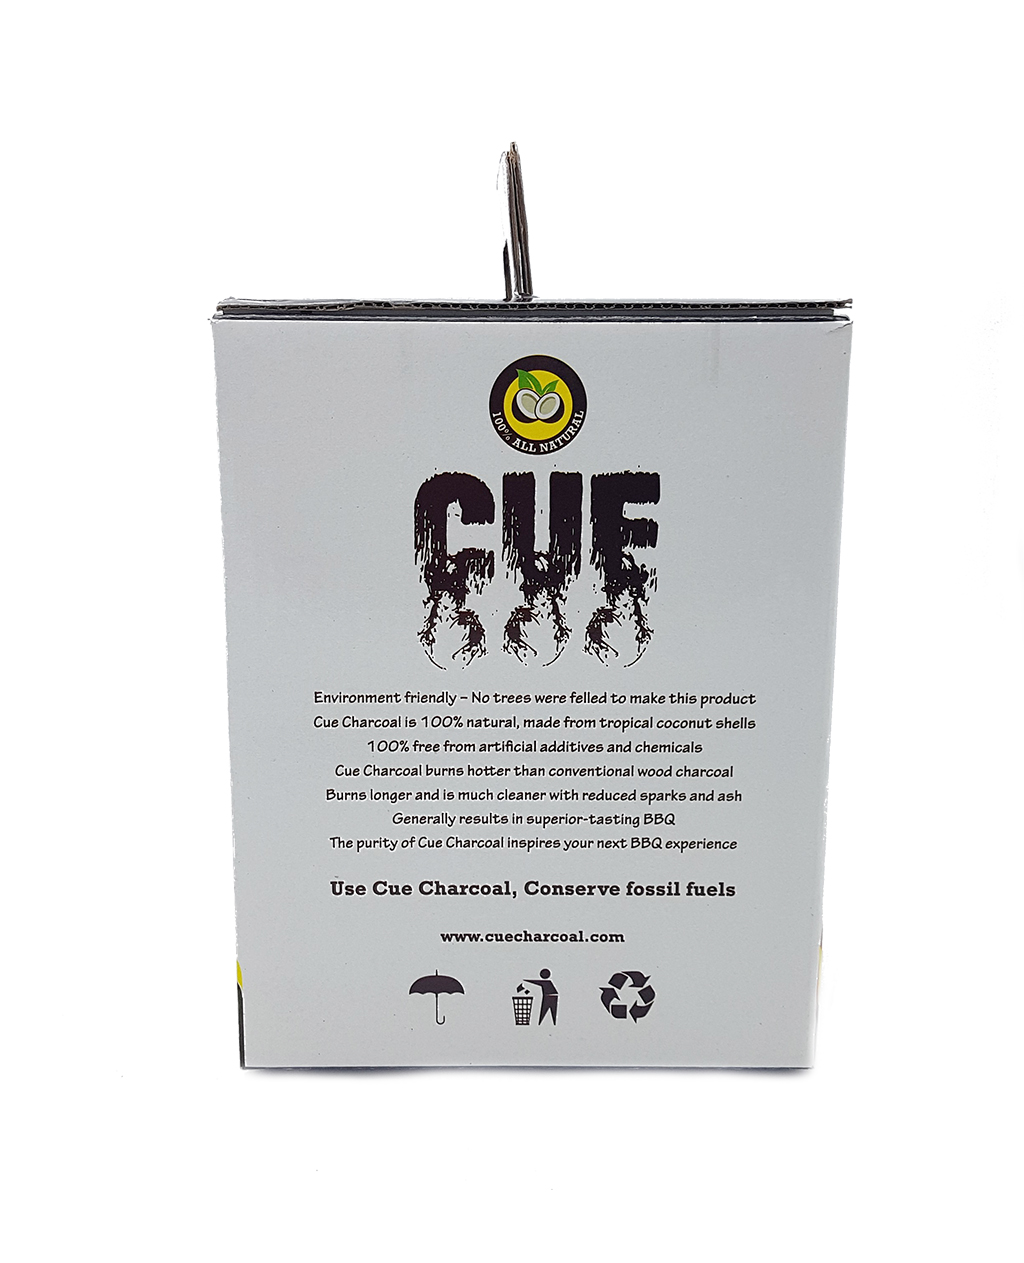 BBQ COCONUT SHELL CHARCOAL BY CUE Lease Co2 in the World * 5KG BOX 